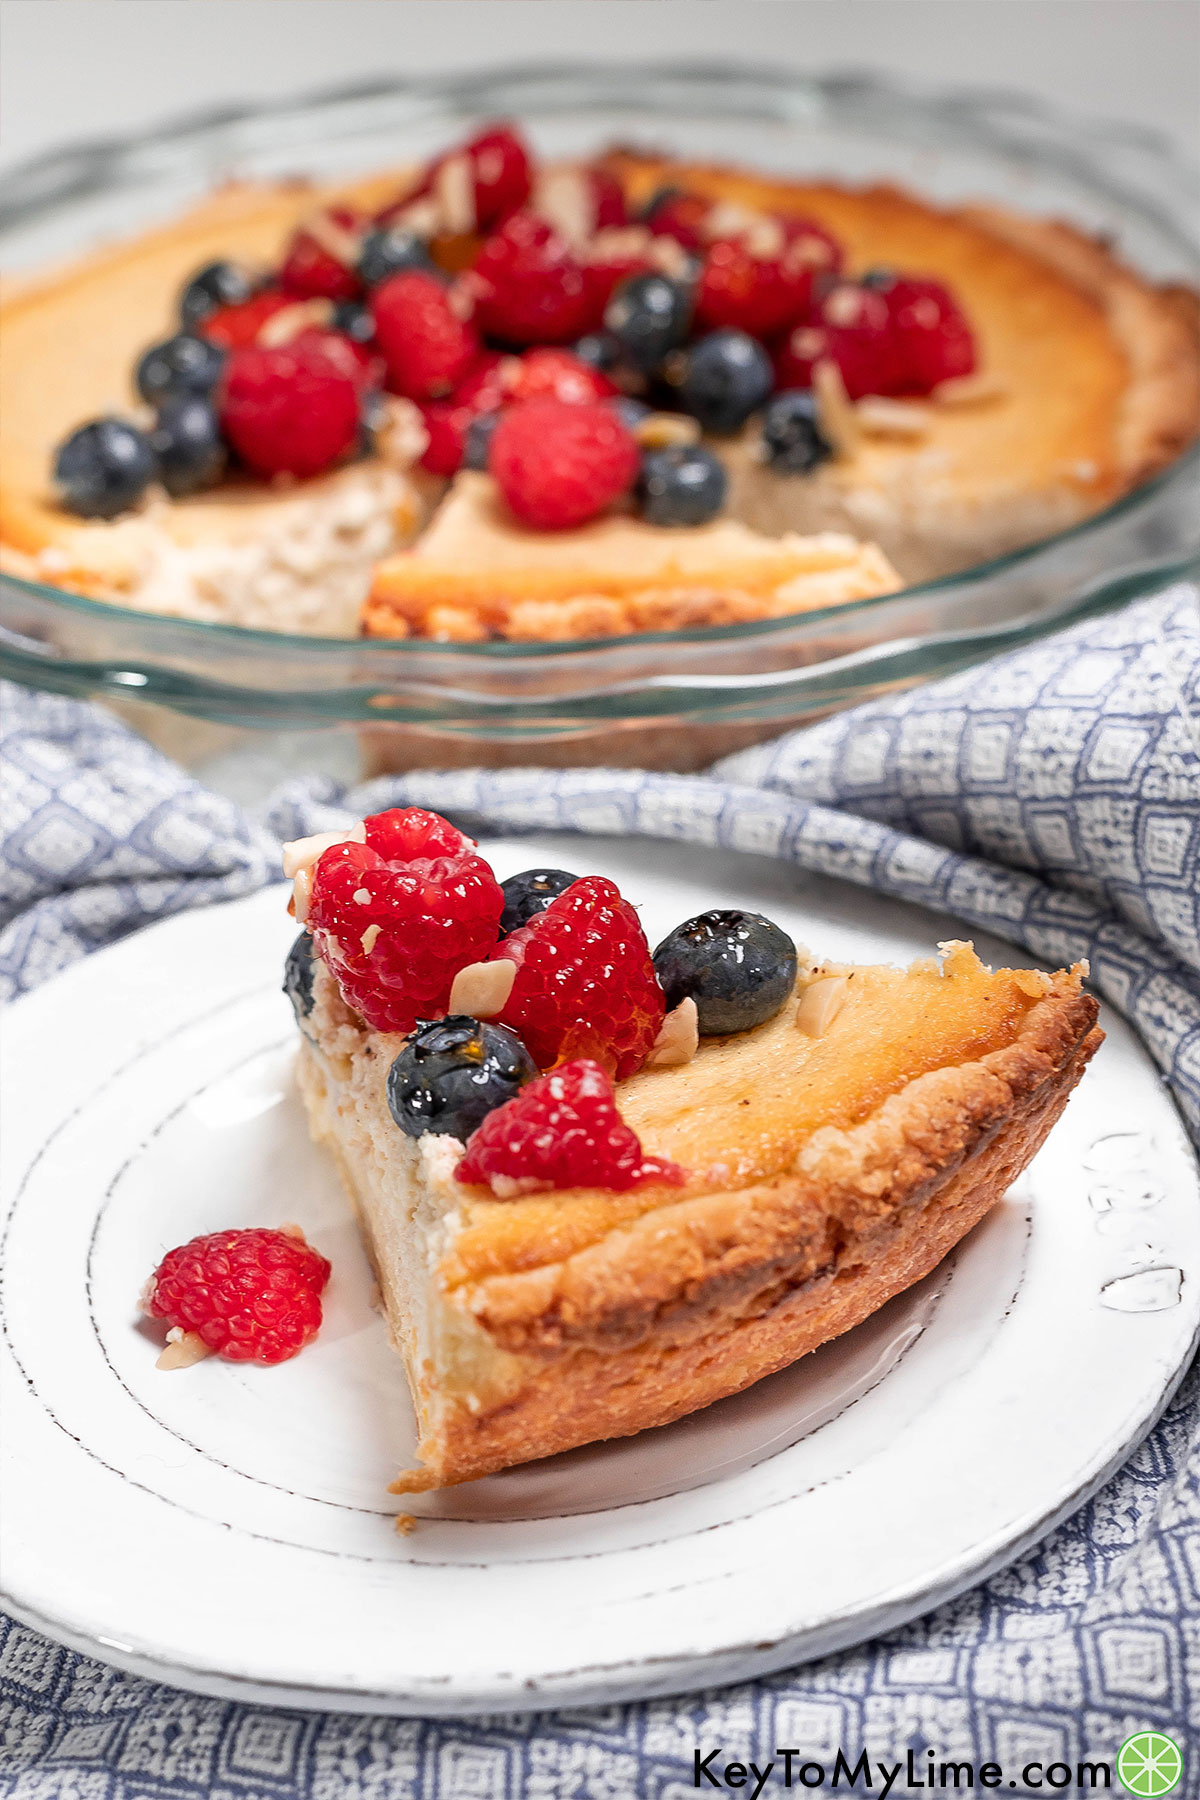 A slice of golden brown buttery crust pie garnished with fresh berries on top.